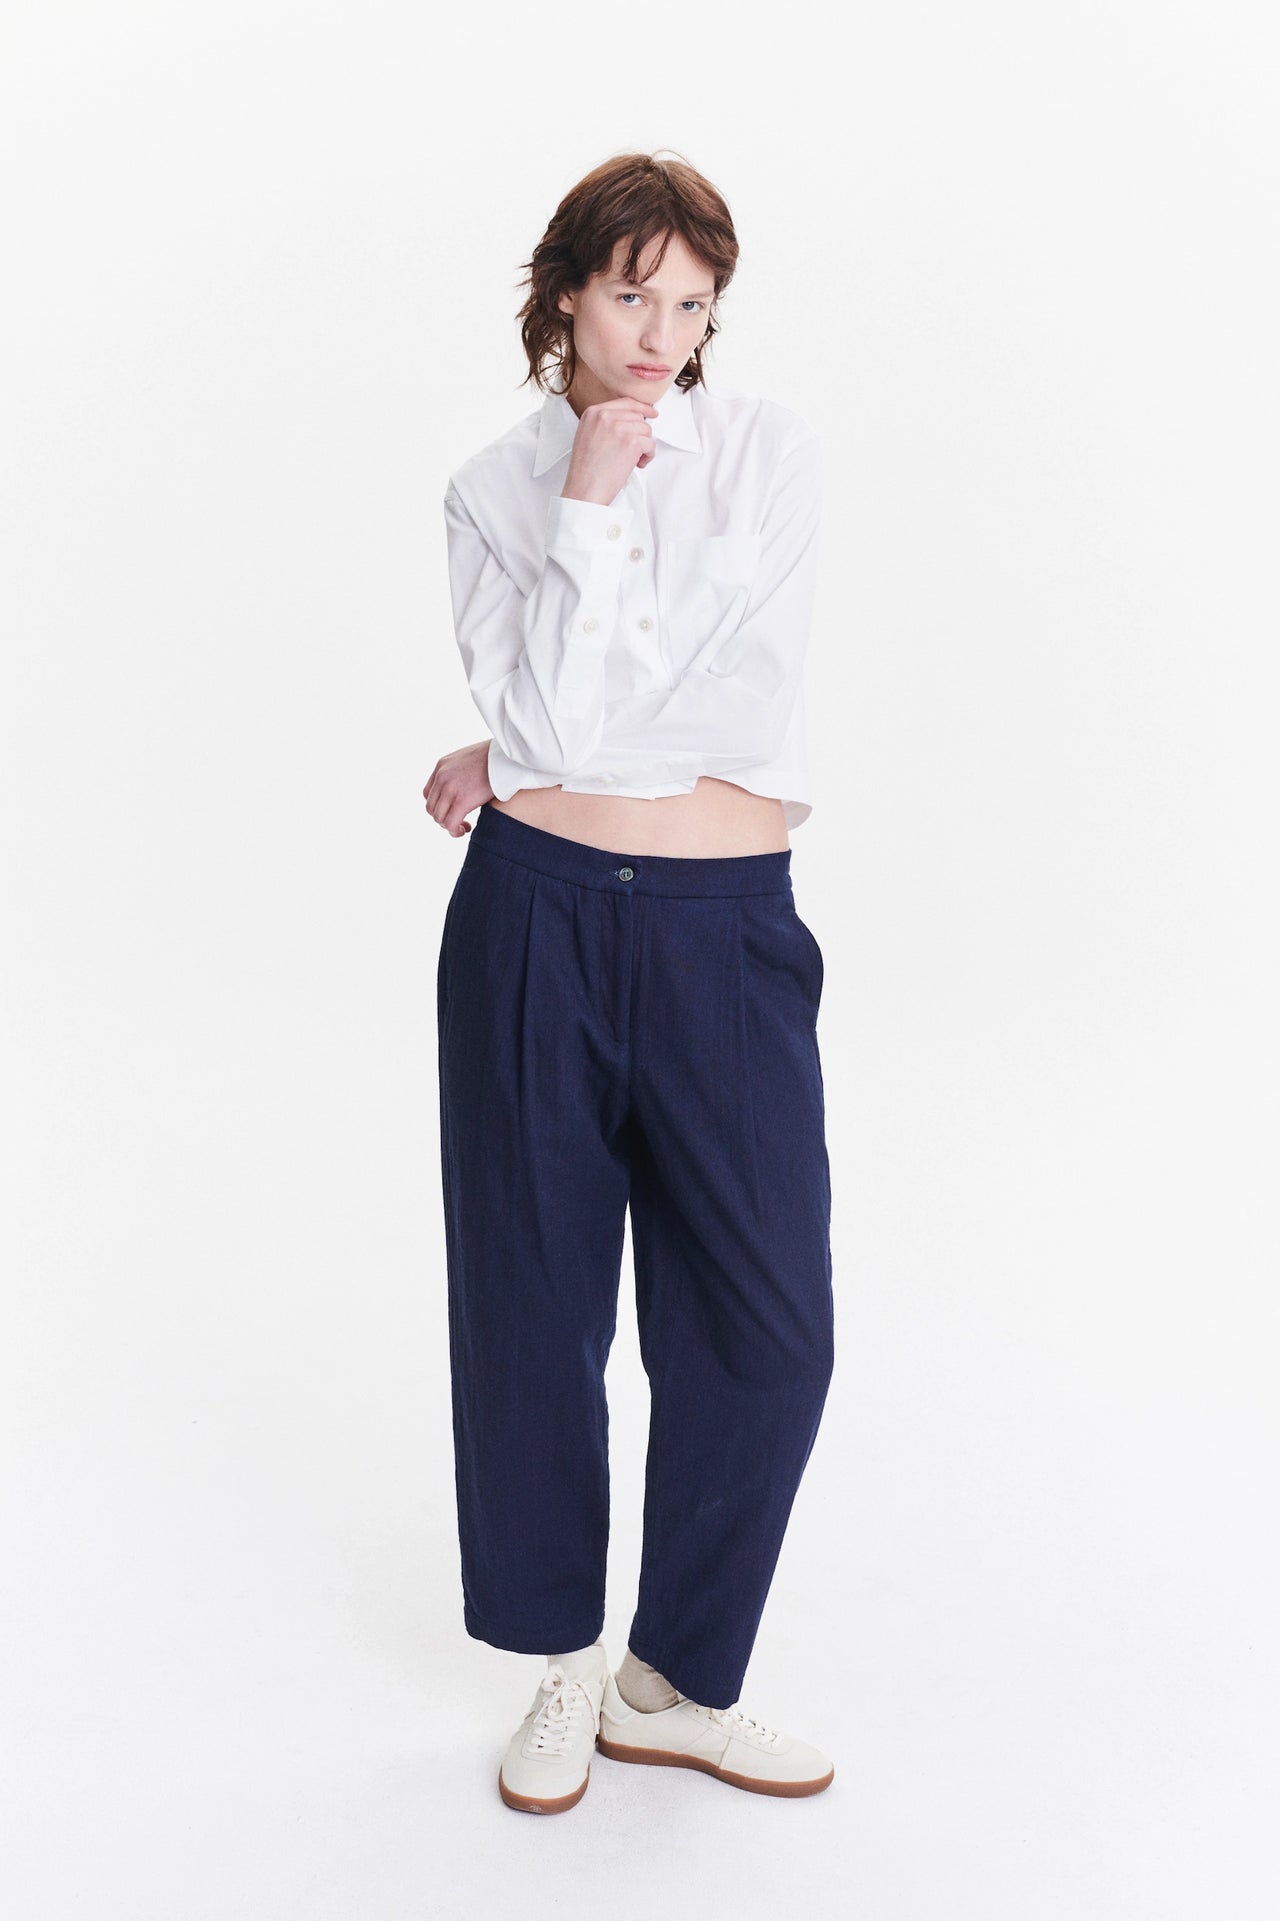 Relaxed Cropped Shirt in a Crisp White Italian Cotton, Nylon and Lycra